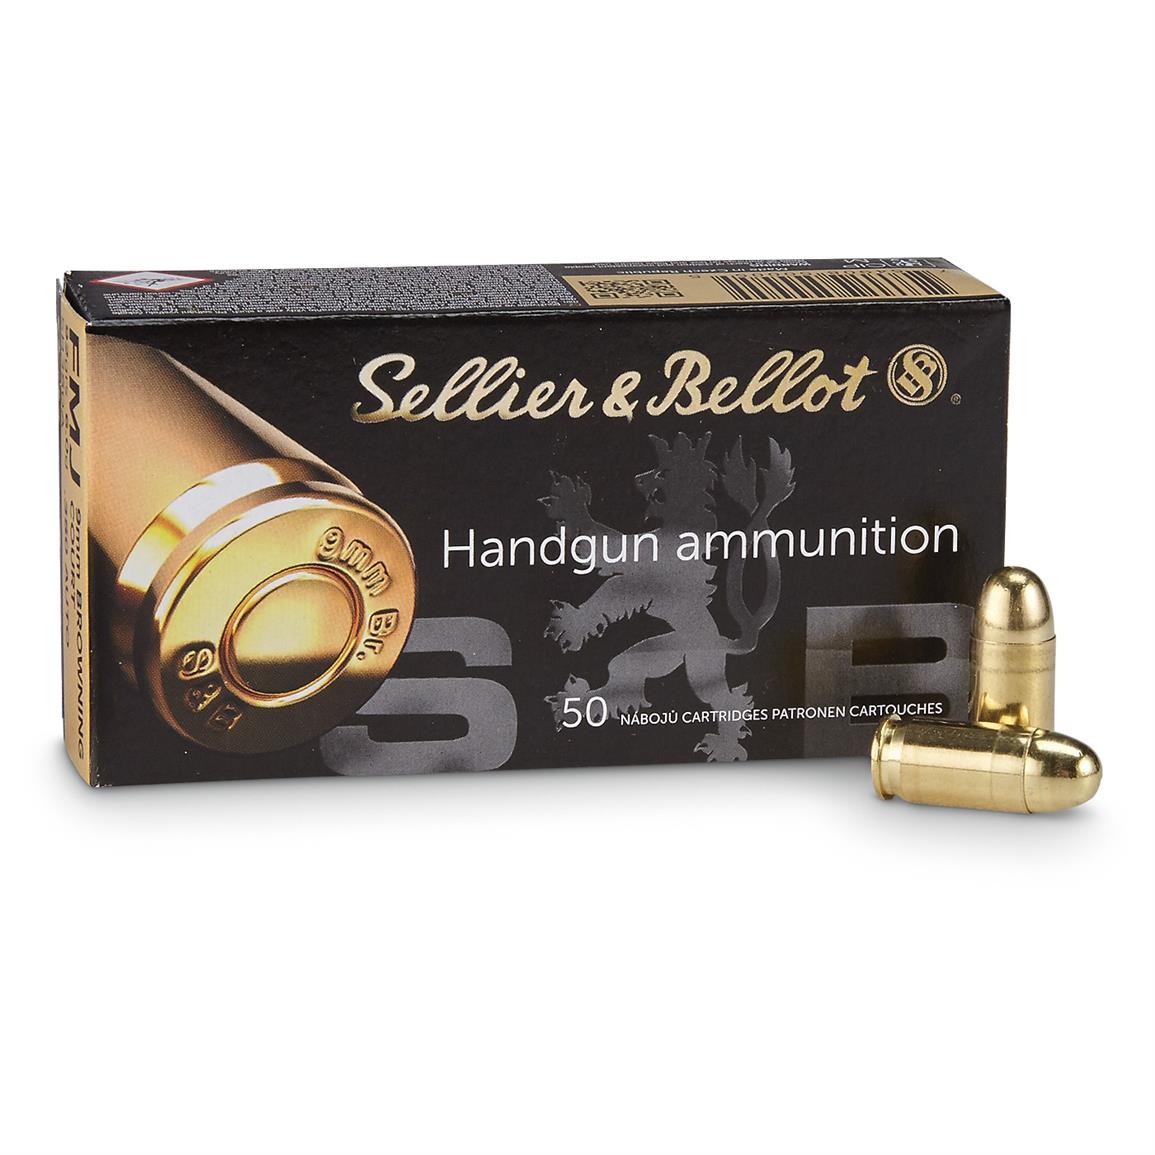 Sellier & Bellot, .380 ACP, FMJ, 92 Grain, 500 Rounds (Box photoed is for illustrative purposes only, offer is for Sellier & Bellot .380 ACP)